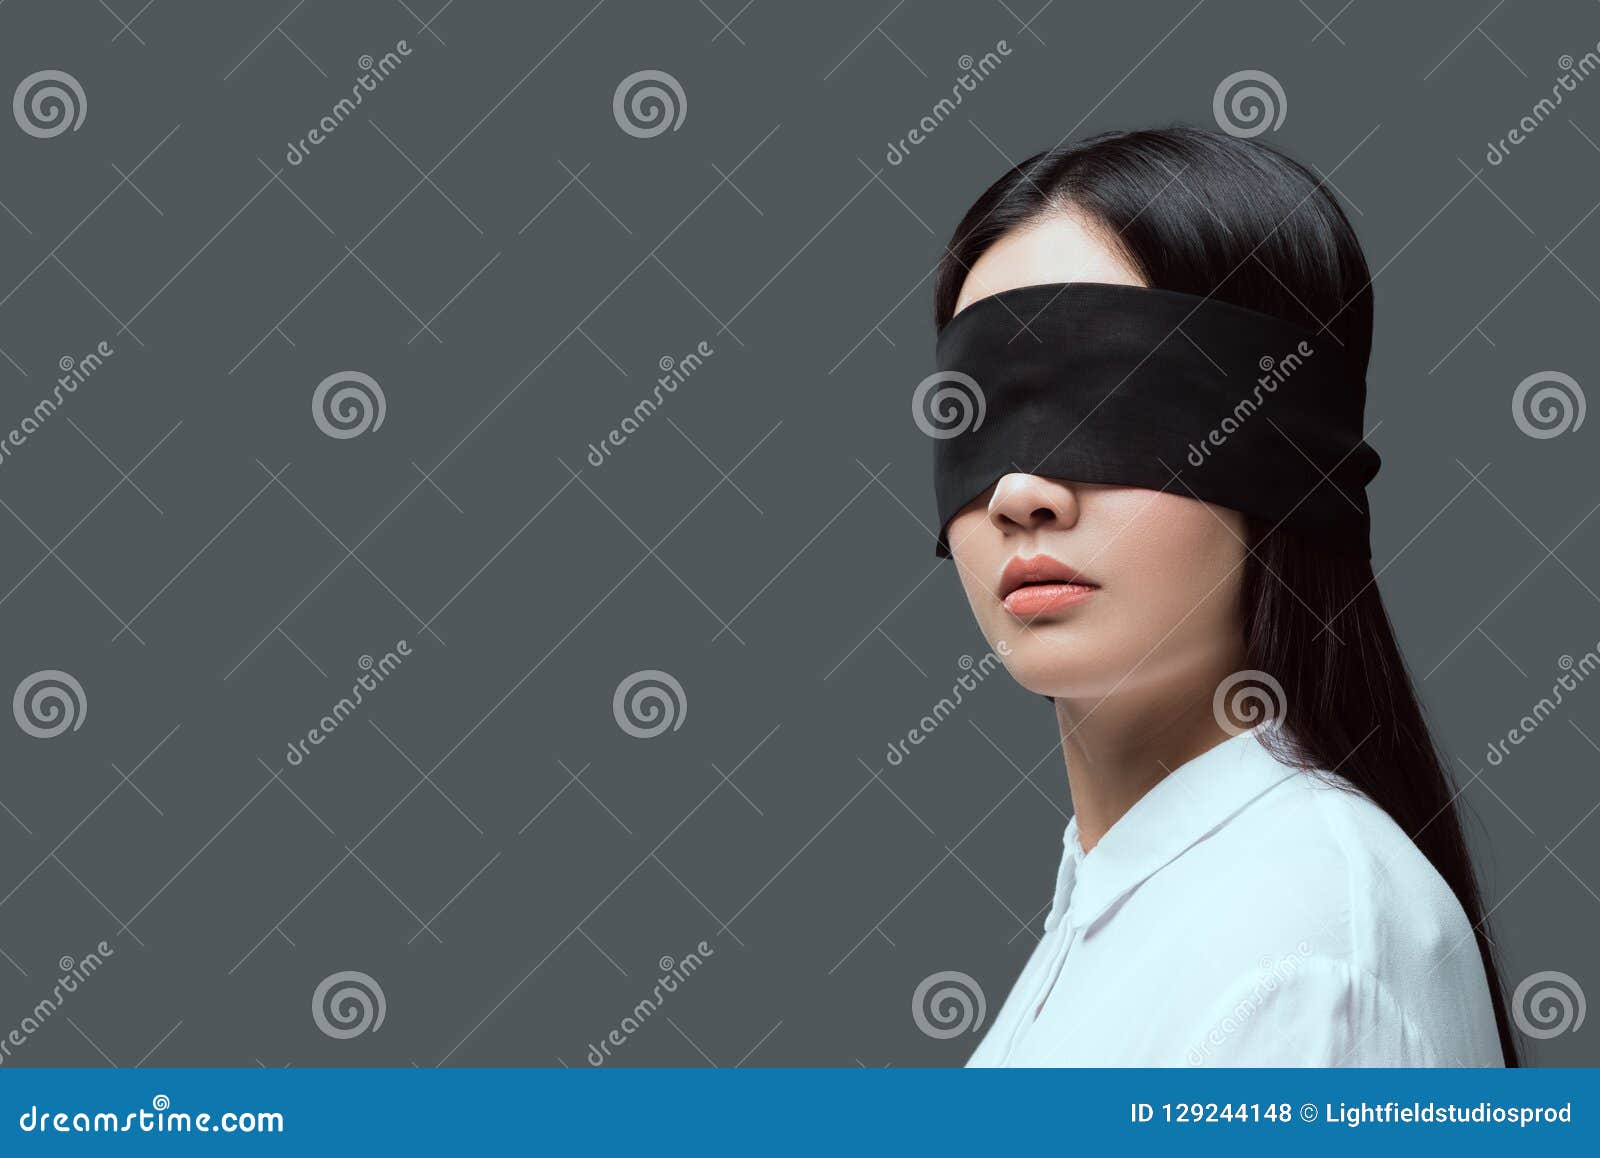 young woman wearing black blindfold